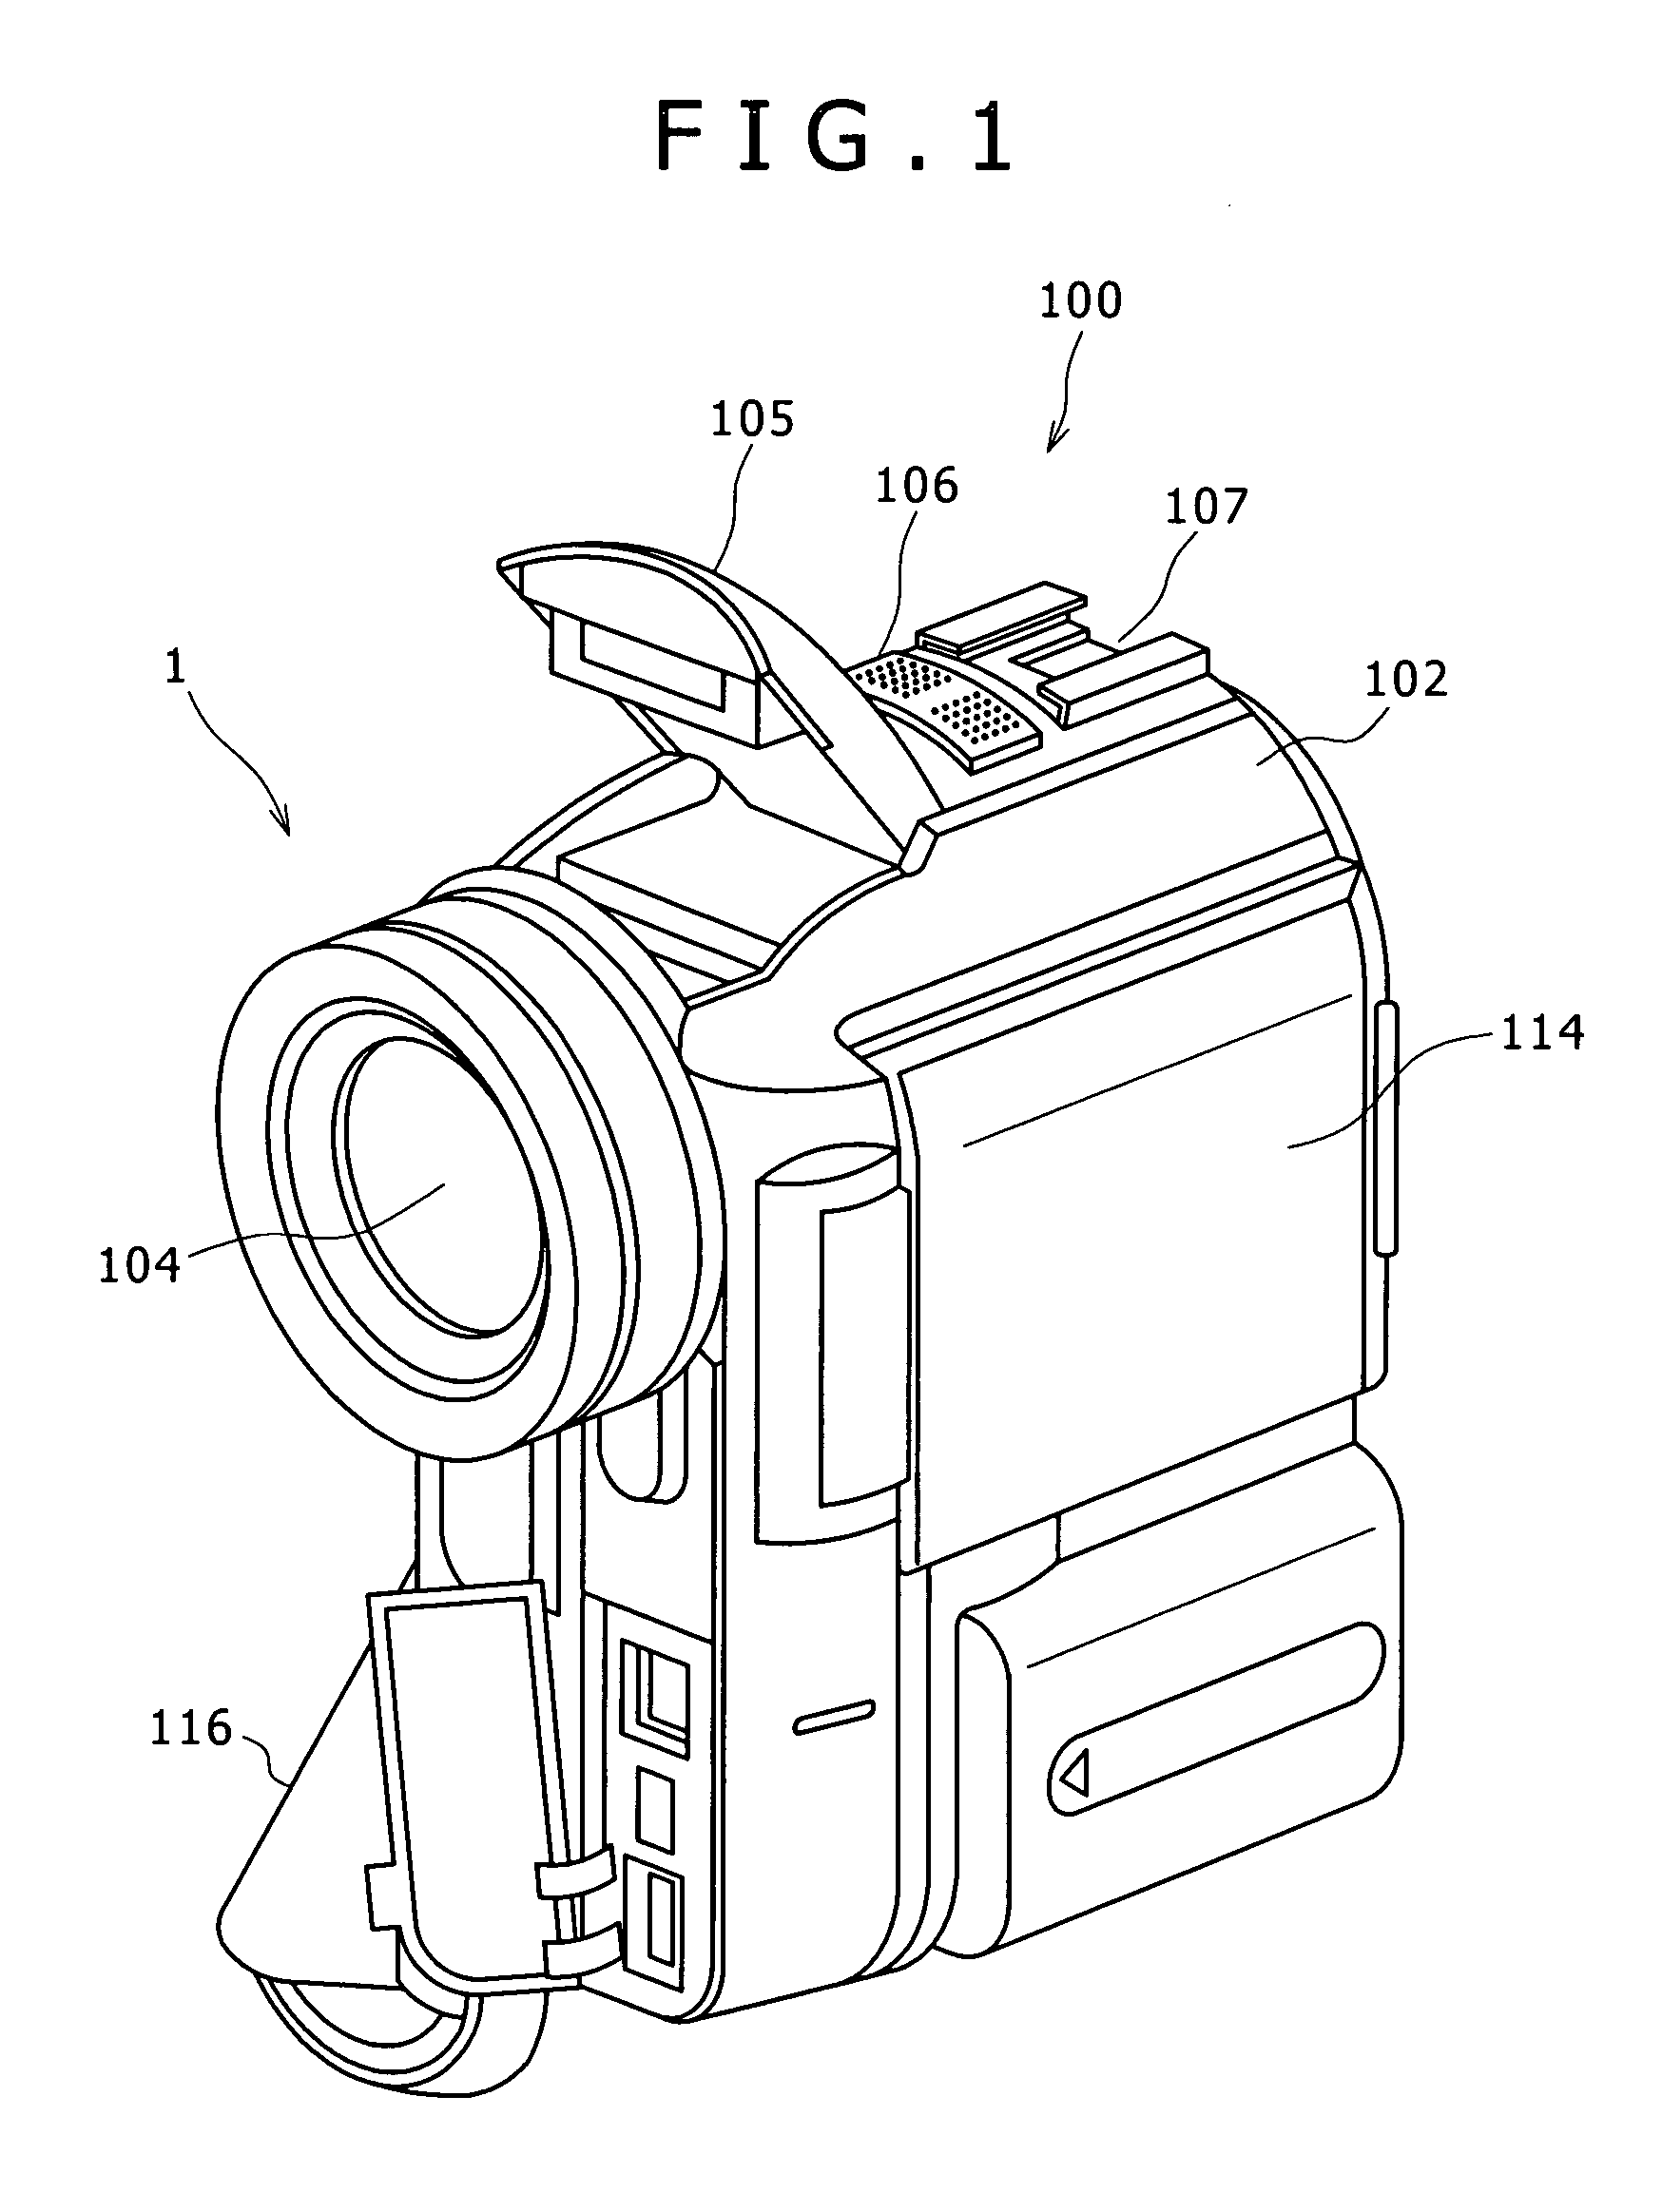 Lens barrel assembly and image capturing apparatus